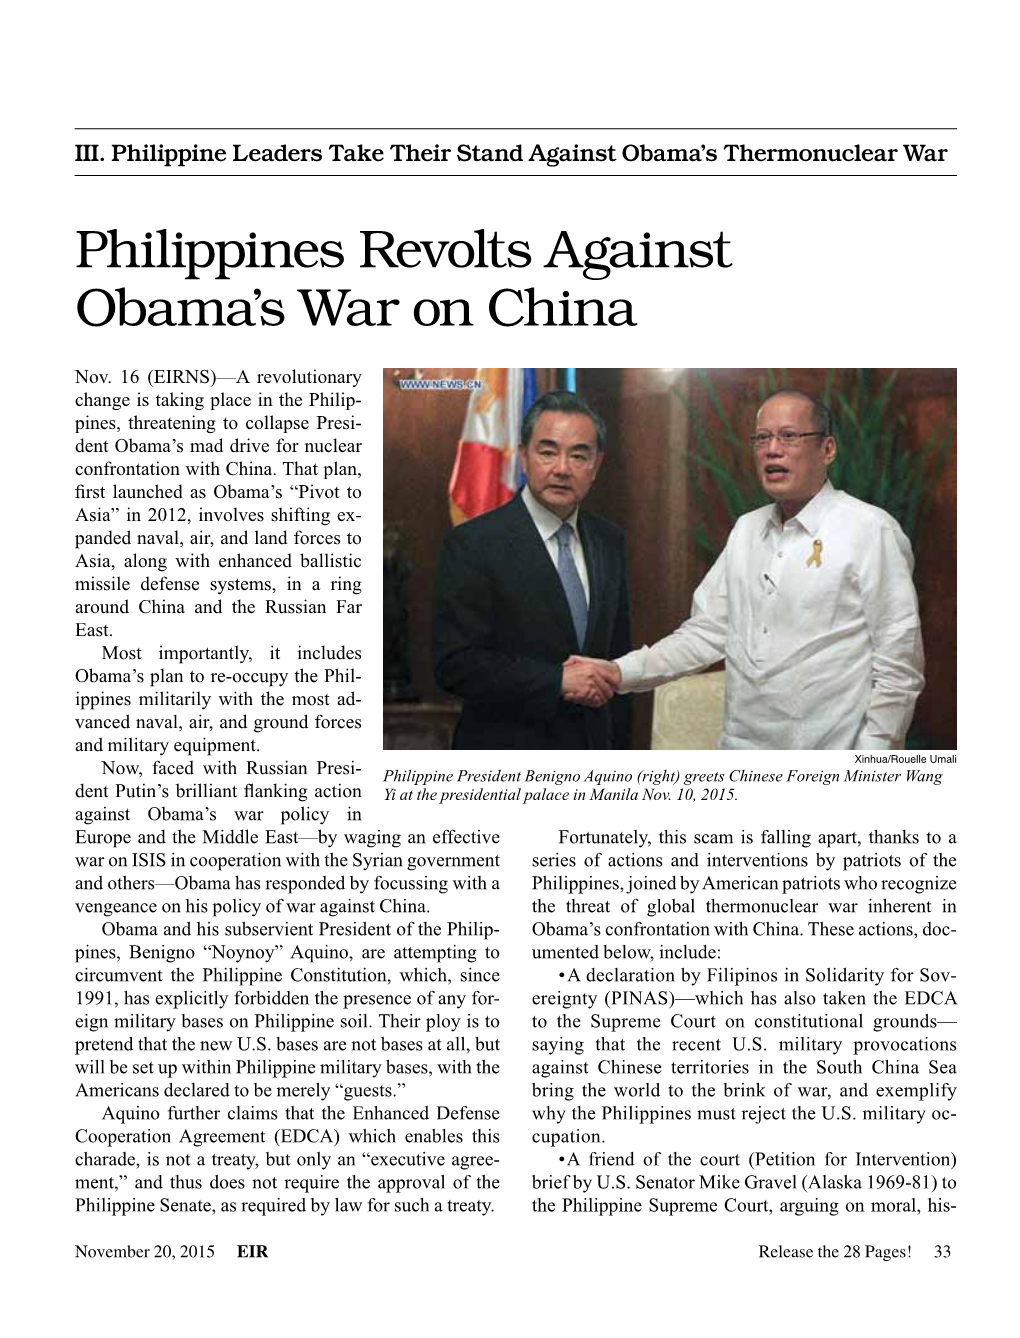 Philippines Revolts Against Obama's War on China